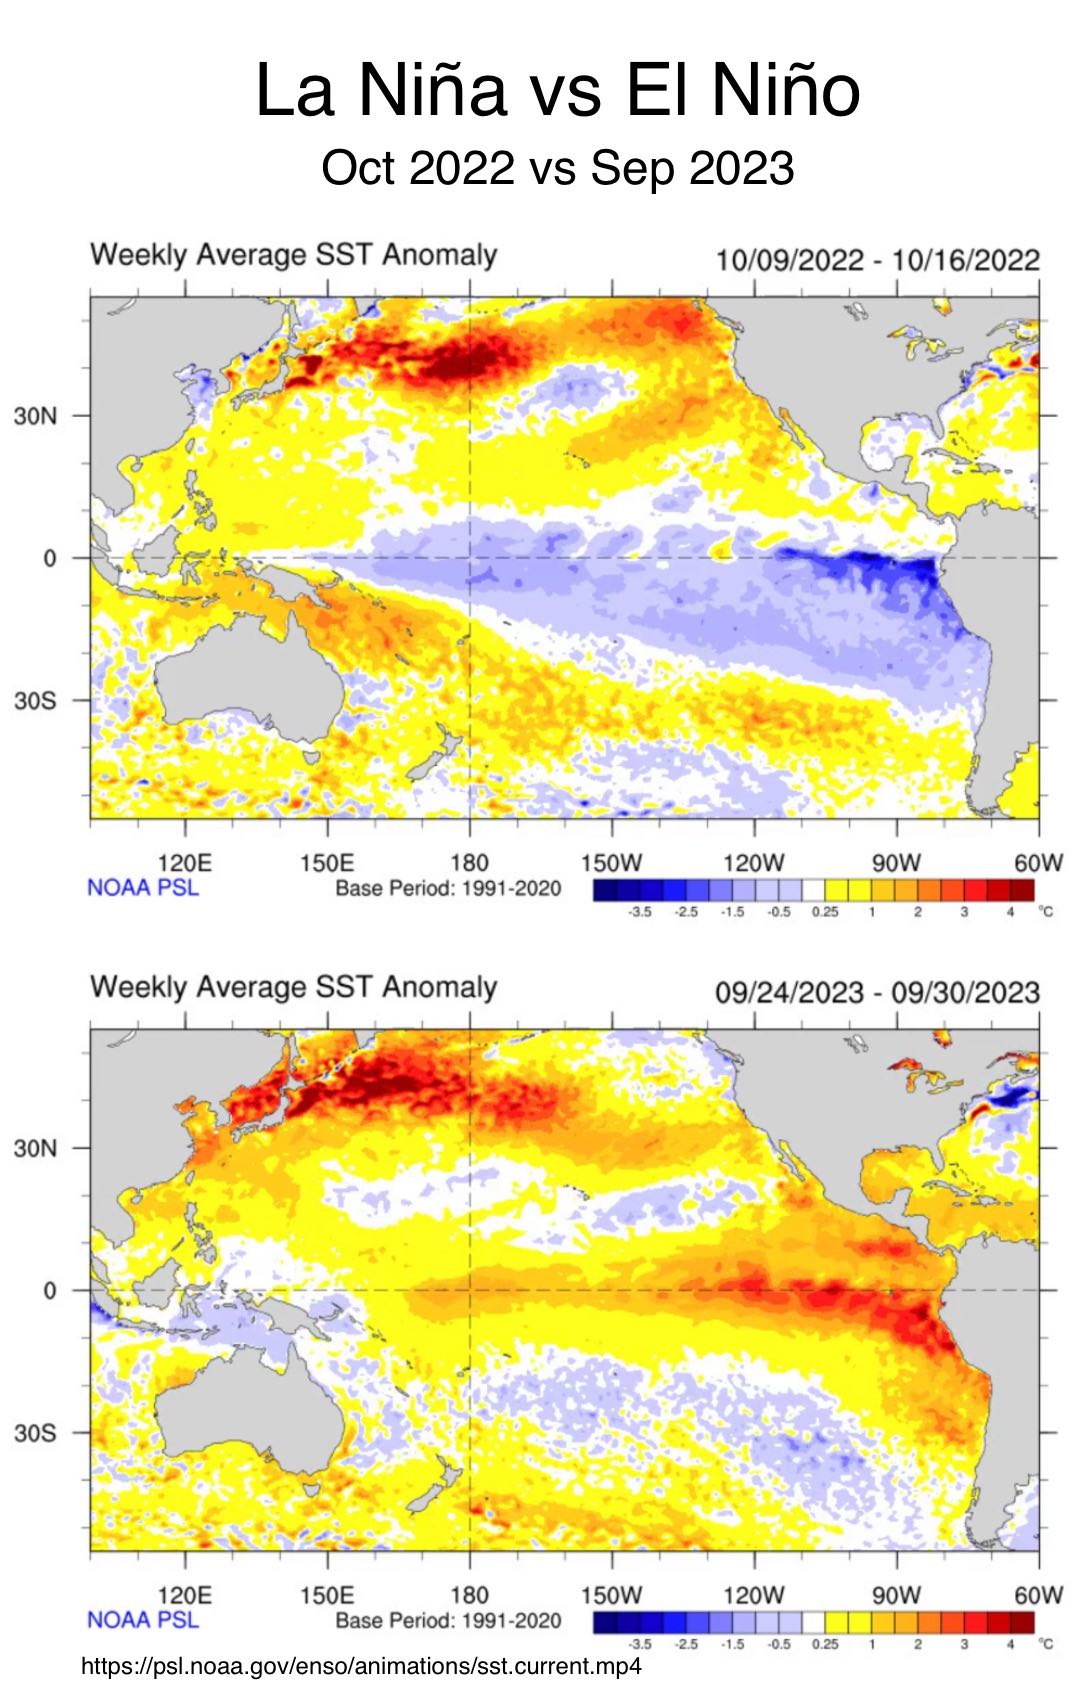 Two charts showing the sea surface temperature at the Pacific Equatorial Ocean area. The top one is for October 2022 showing colder than average temperature, and the bottom one is for September 2023 showing a much warmer temperature.